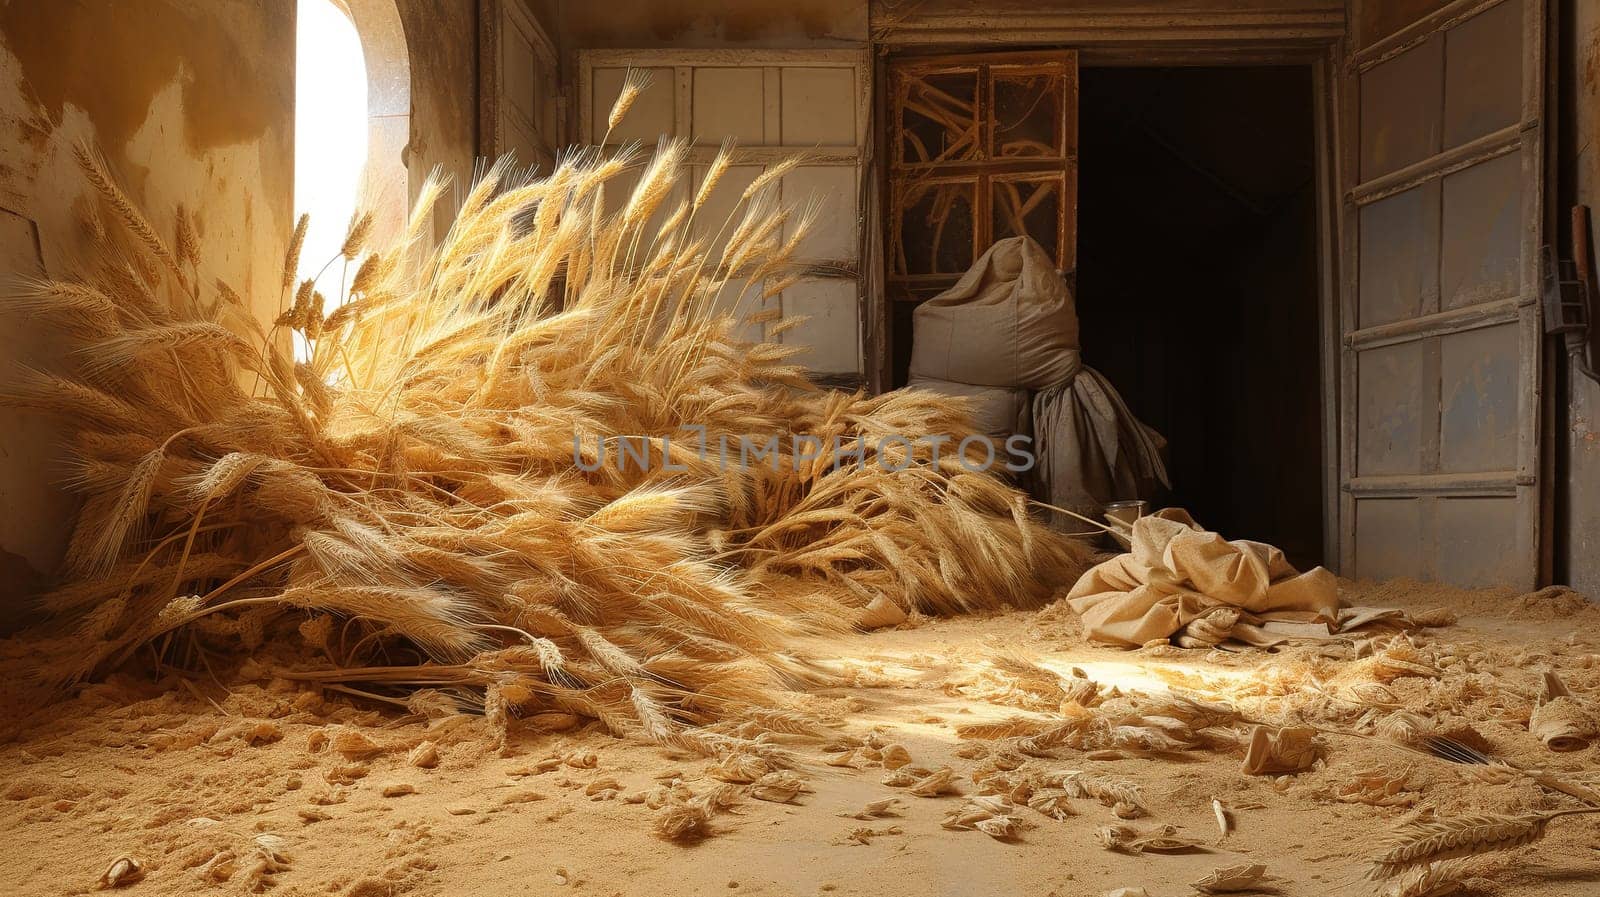 abandoned warehouse with wheat, grain on the floor spilling out of bags torn by rodents, concept of food storage violation,transportation problems, food crisis, war, high quality photography